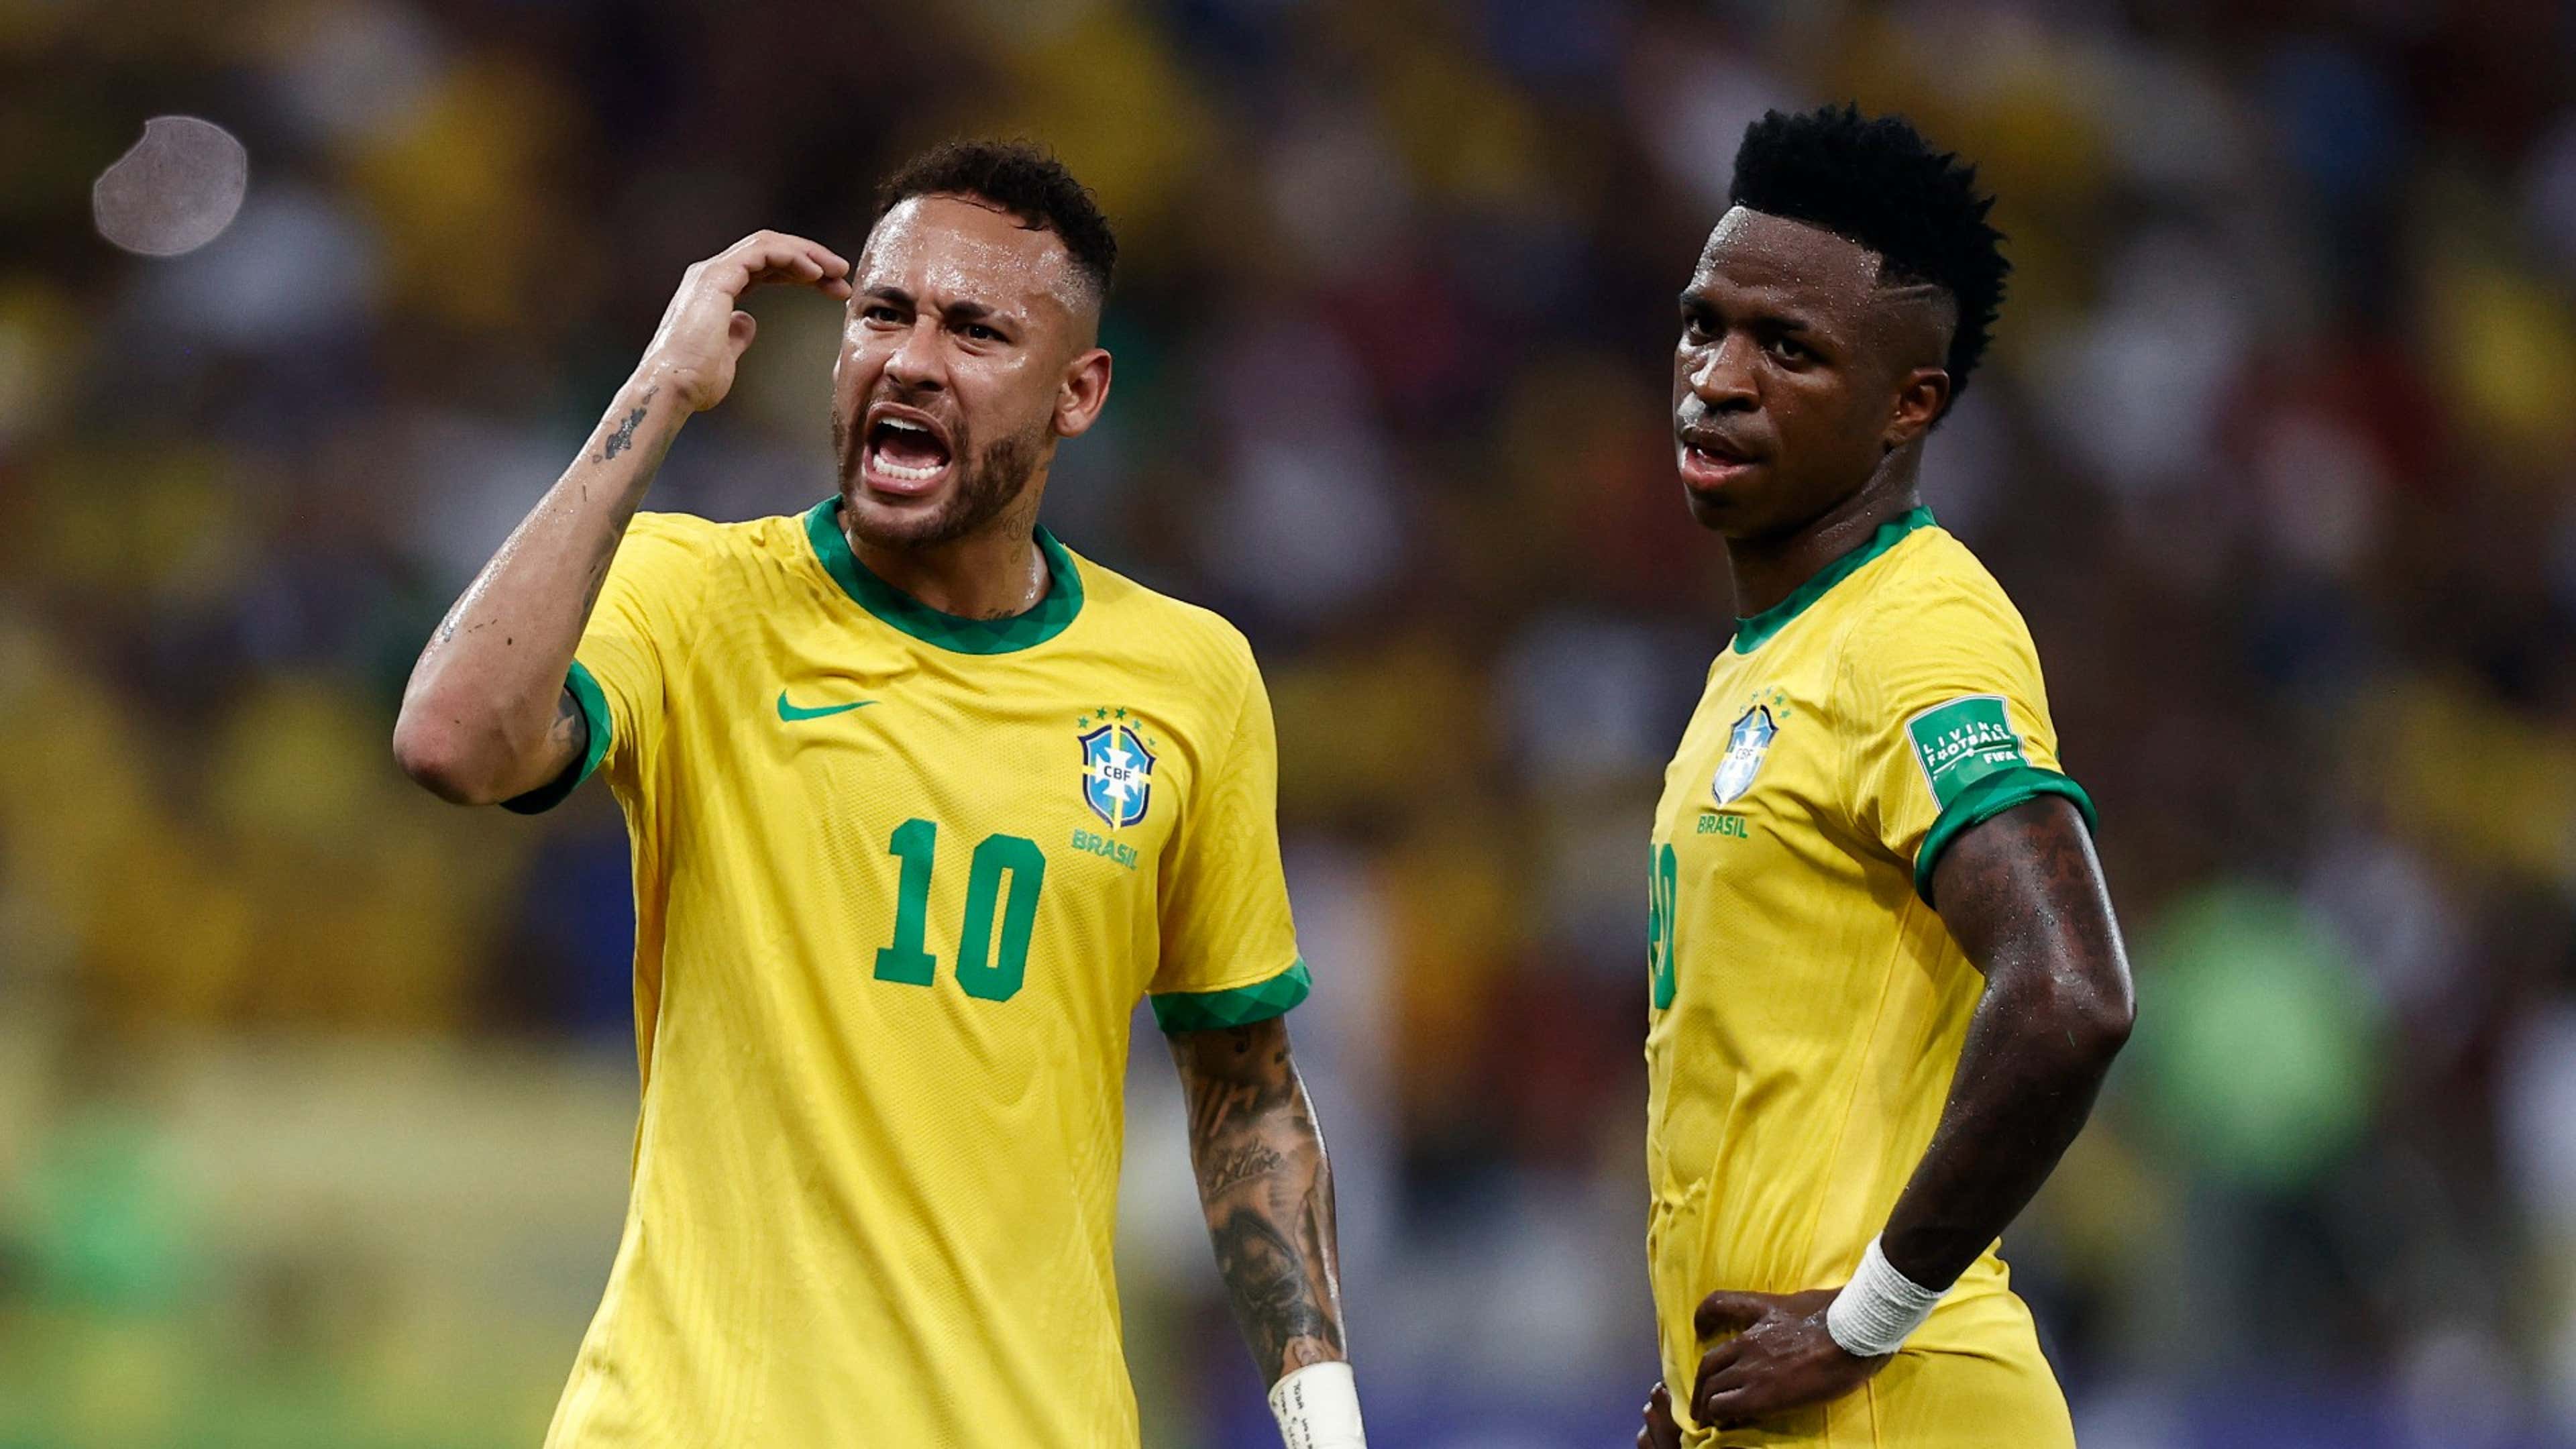 OptaJoe on X: 26 - Brazil have now used all 26 members of their squad at  the 2022 World Cup (including three goalkeepers), becoming the first side  in World Cup history to